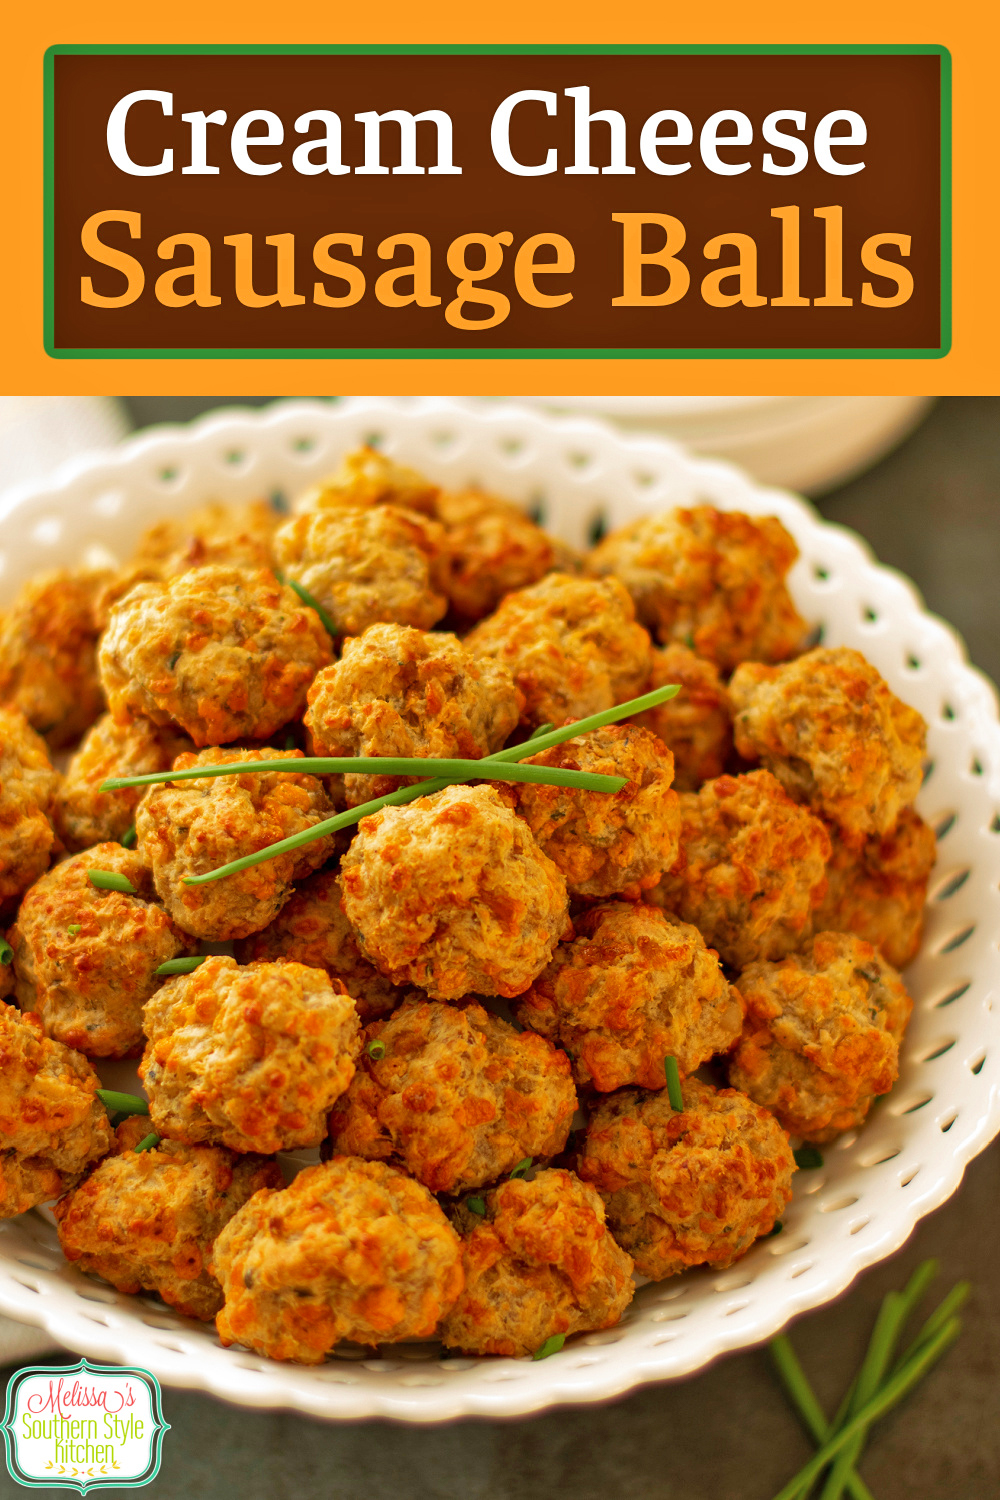 These two-bite Cream Cheese Sausage Balls can be served as an appetizer or for breakfast and brunch with a variety of sauces for dipping. #sasuagerecipes #sausageballs #creamcheesesausageballs #cheddarsausageballs #southernappetizers #jimmydeansausage via @melissasssk